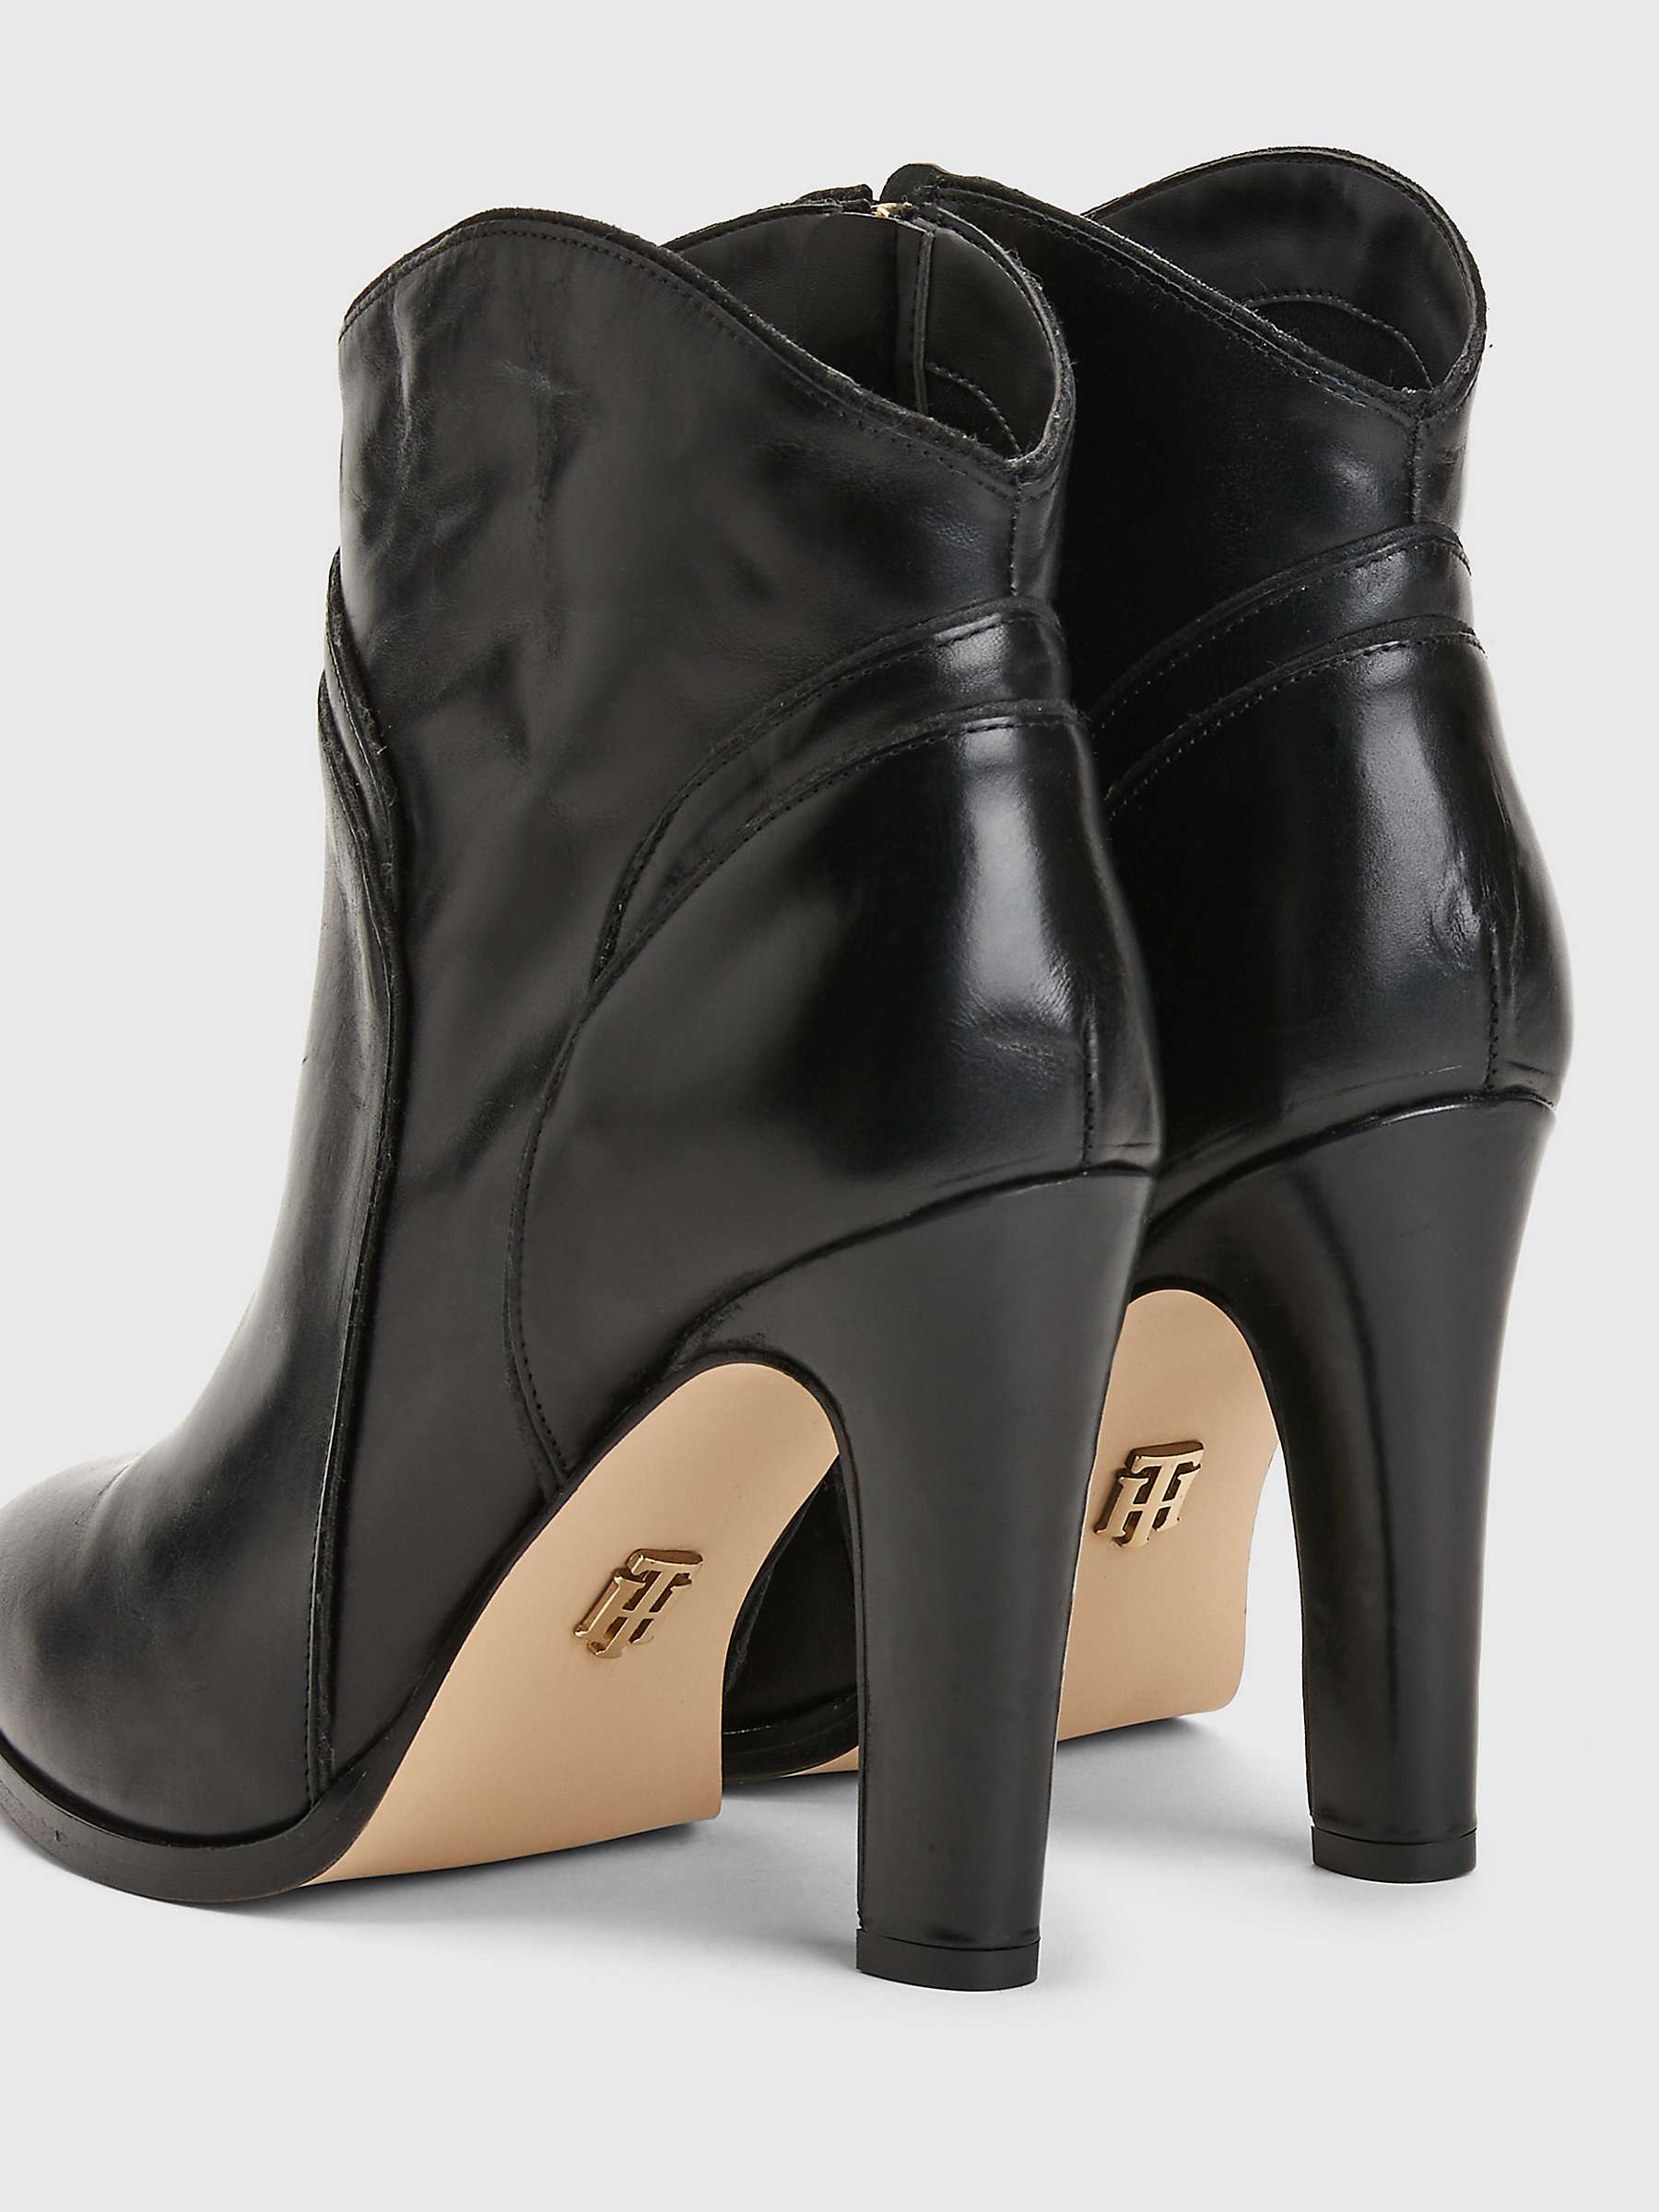 carpet mortgage To edit Tommy Hilfiger Leather High Heel Ankle Boots, Black at John Lewis & Partners